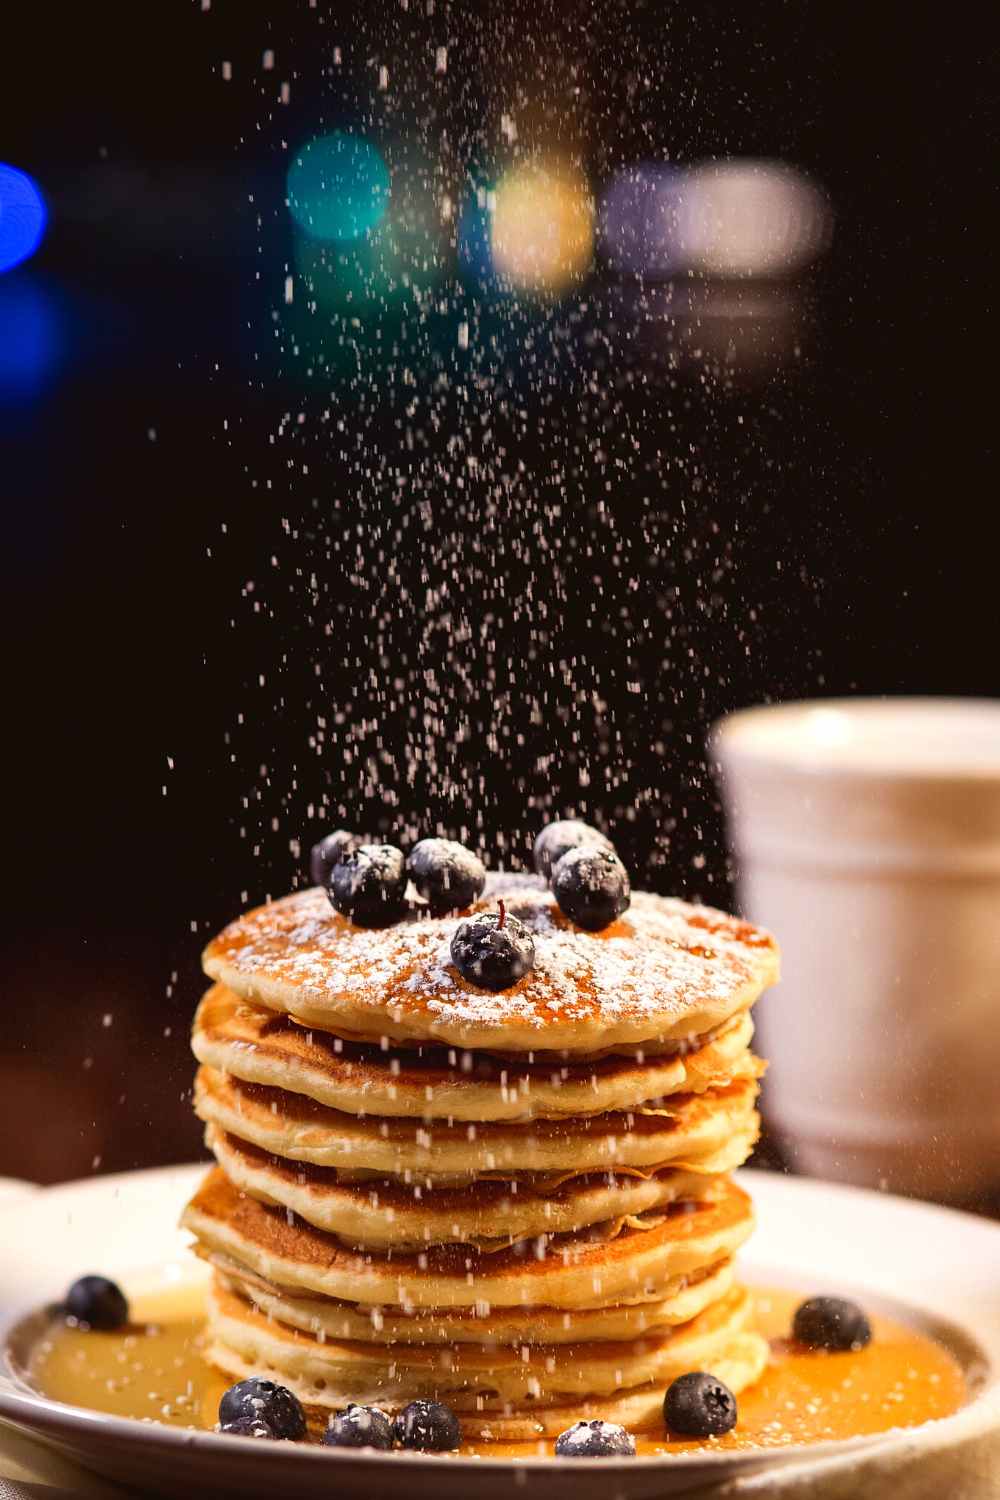 gingerbread pancakes with blueberries on top and dusted with sugar